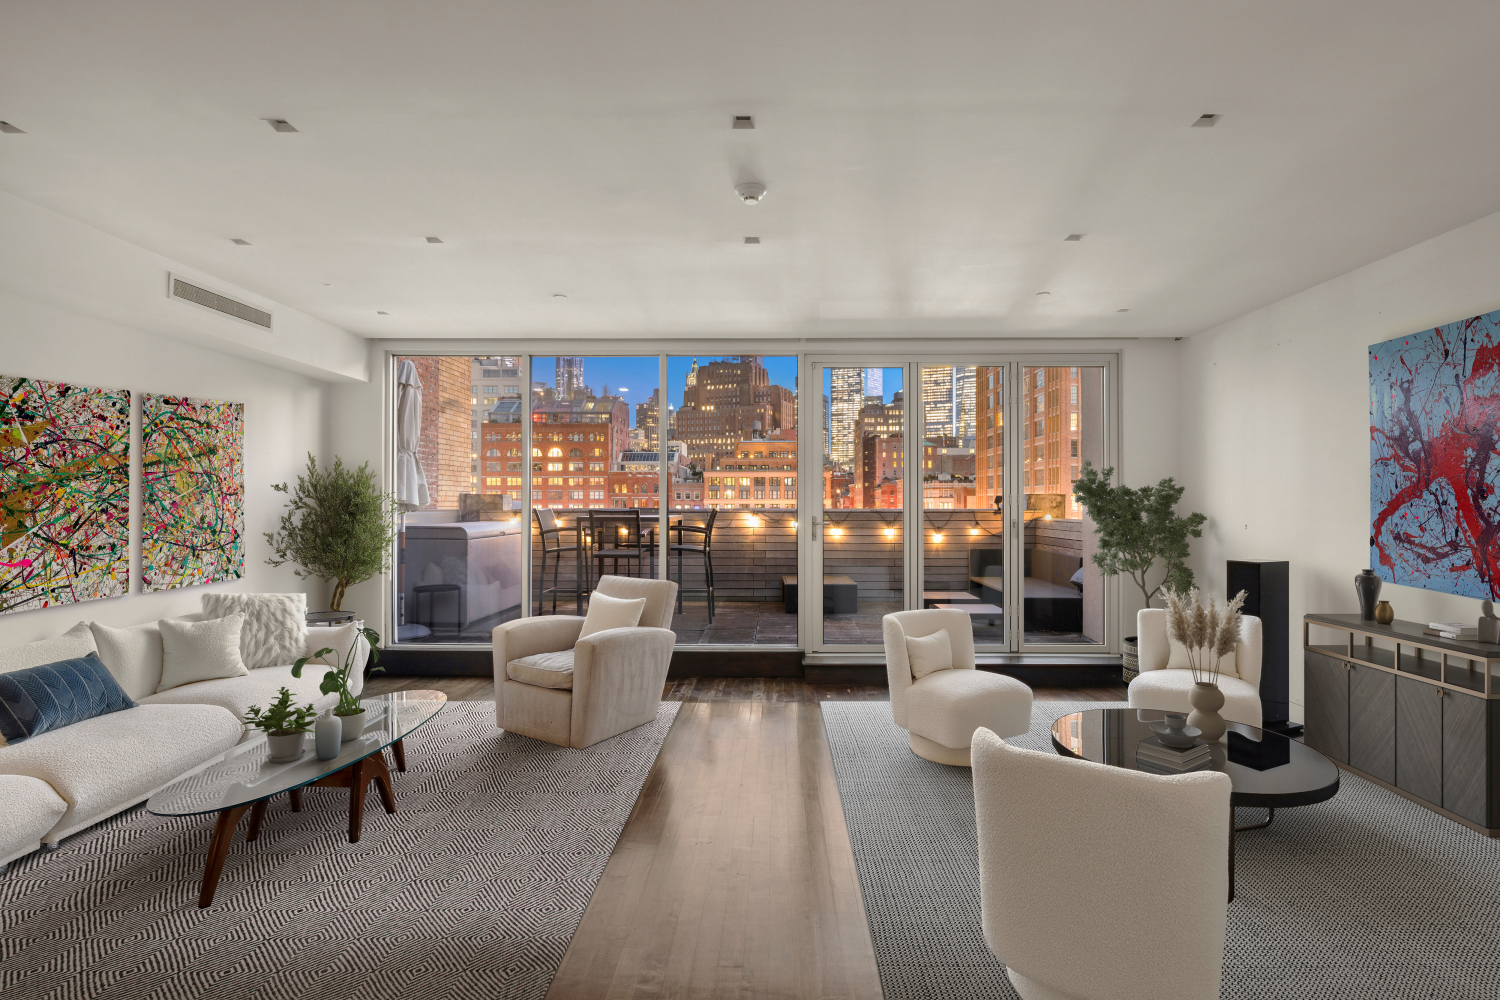 46 Laight Street Ph, Tribeca, Downtown, NYC - 4 Bedrooms  
4.5 Bathrooms  
10 Rooms - 